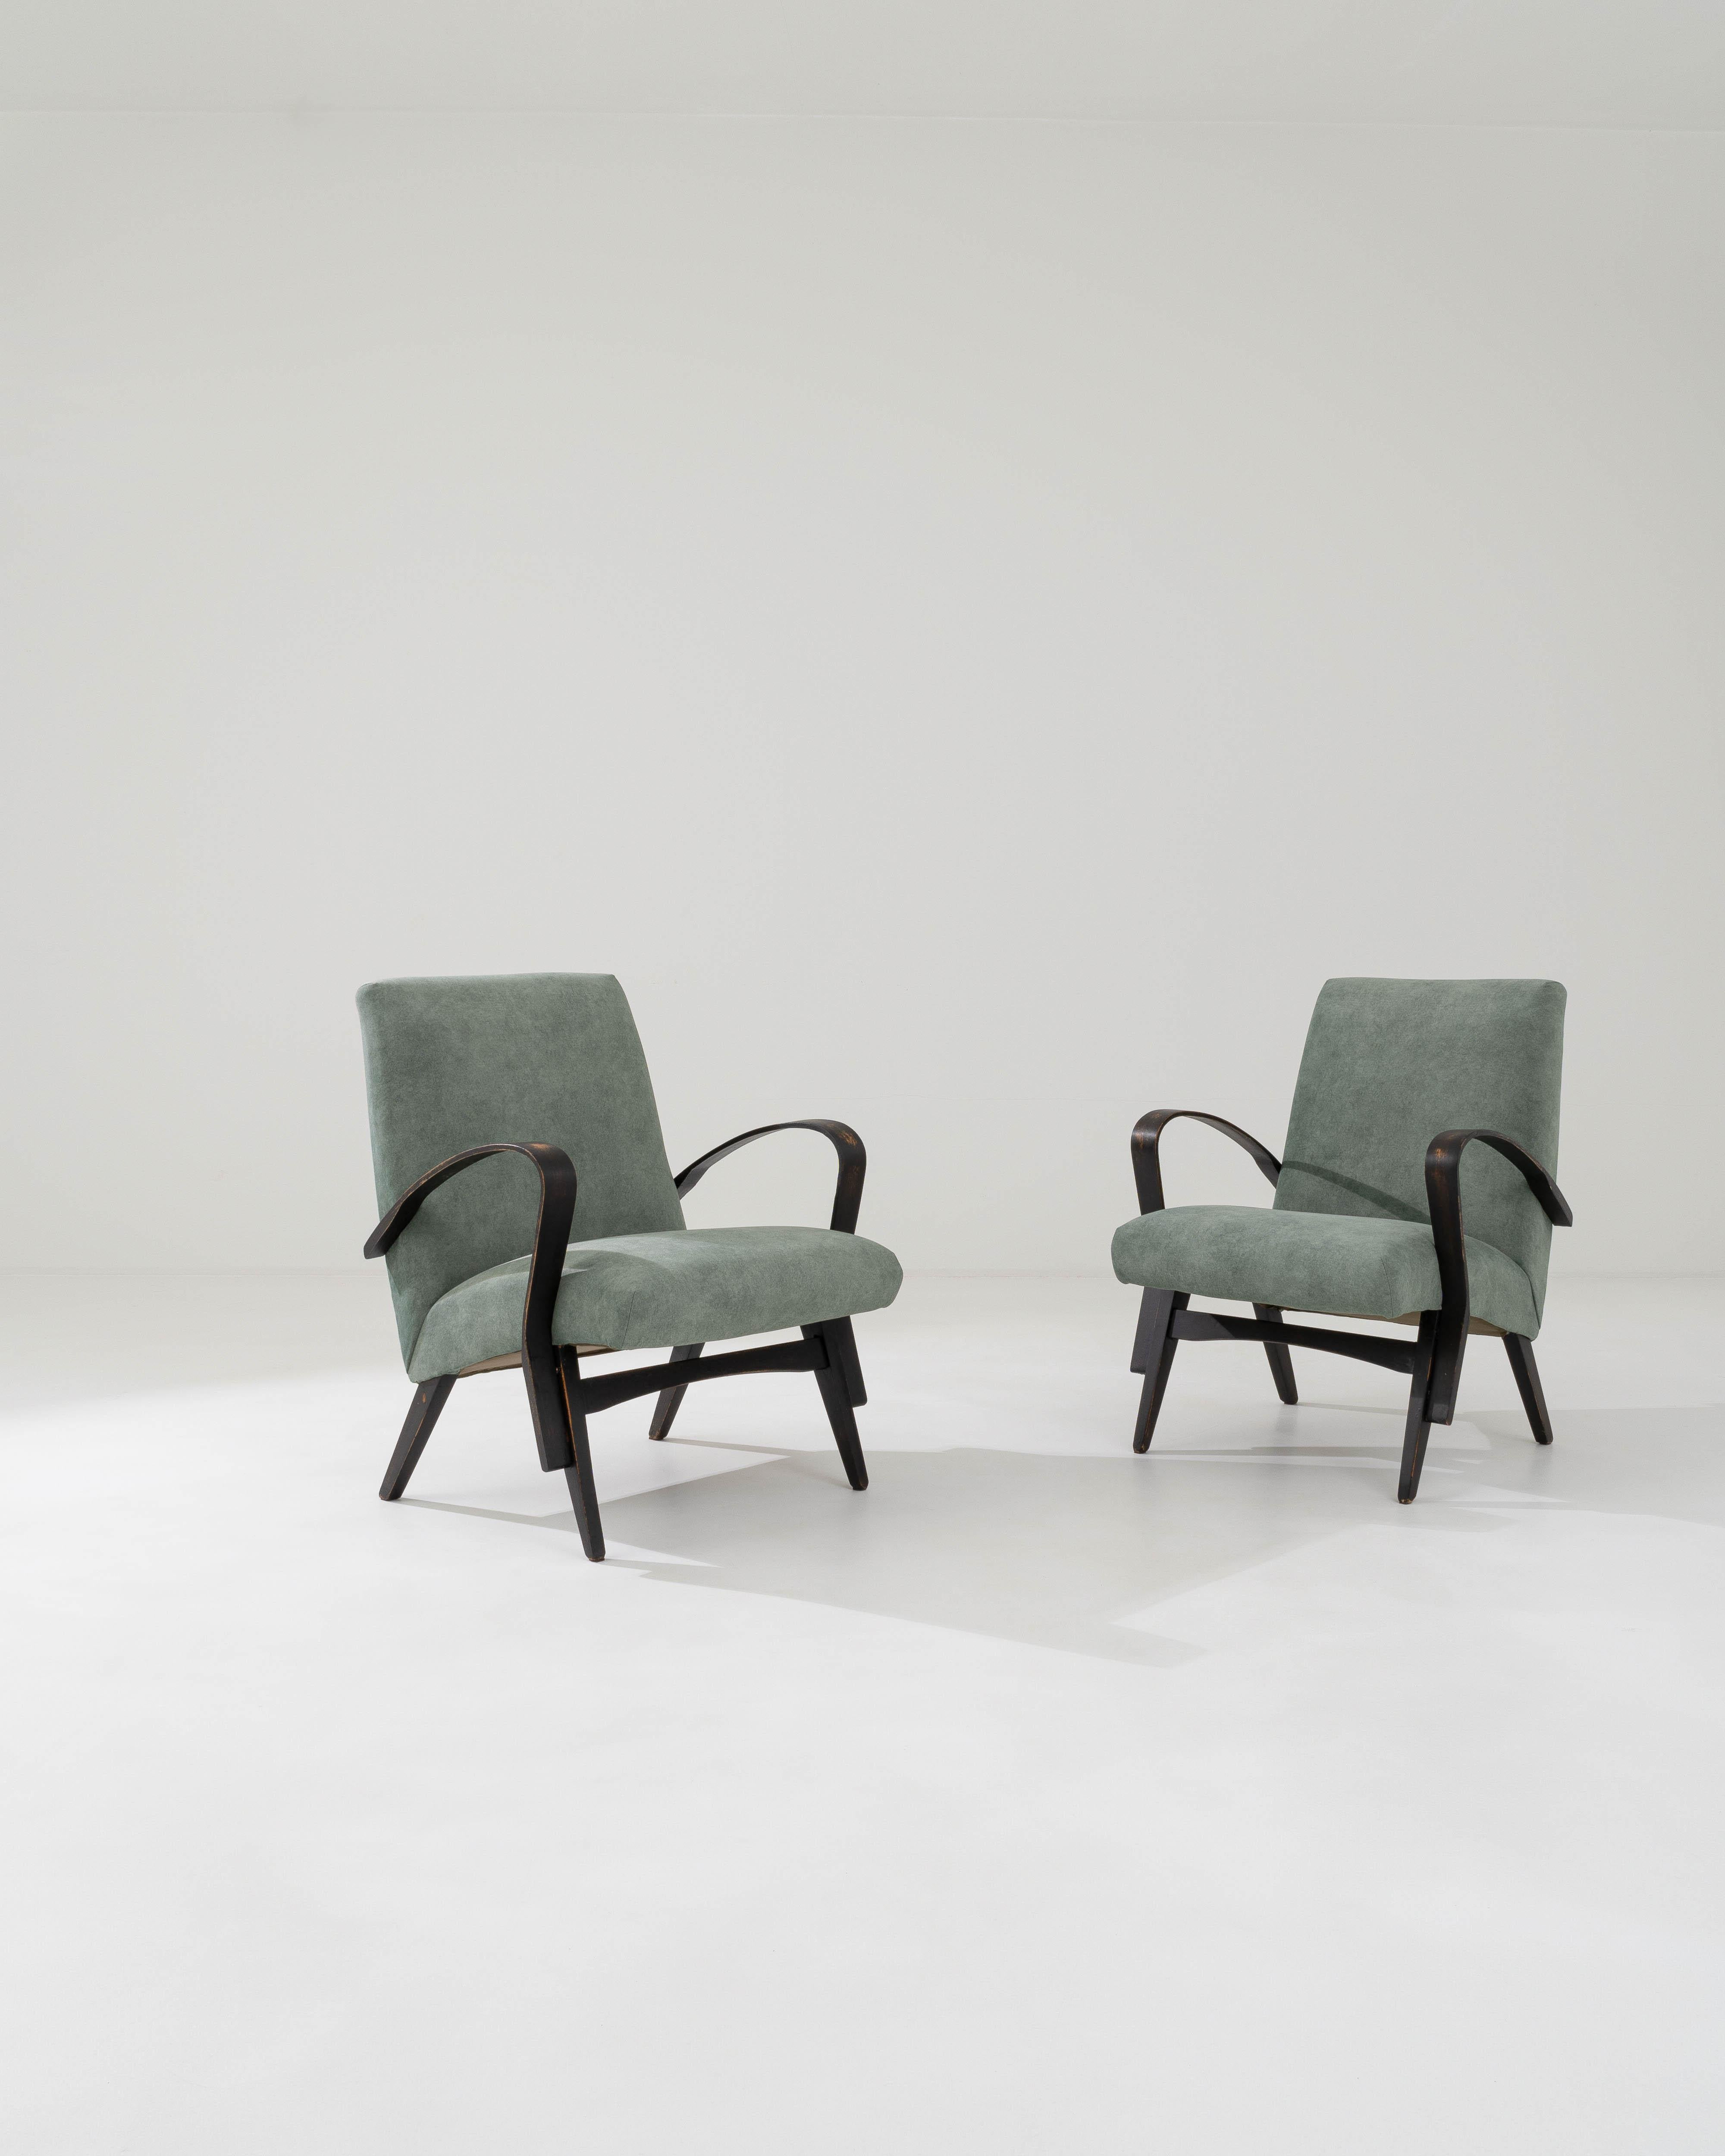 Upholstery 1960s Czech Upholstered Armchairs By Tatra, a Pair For Sale